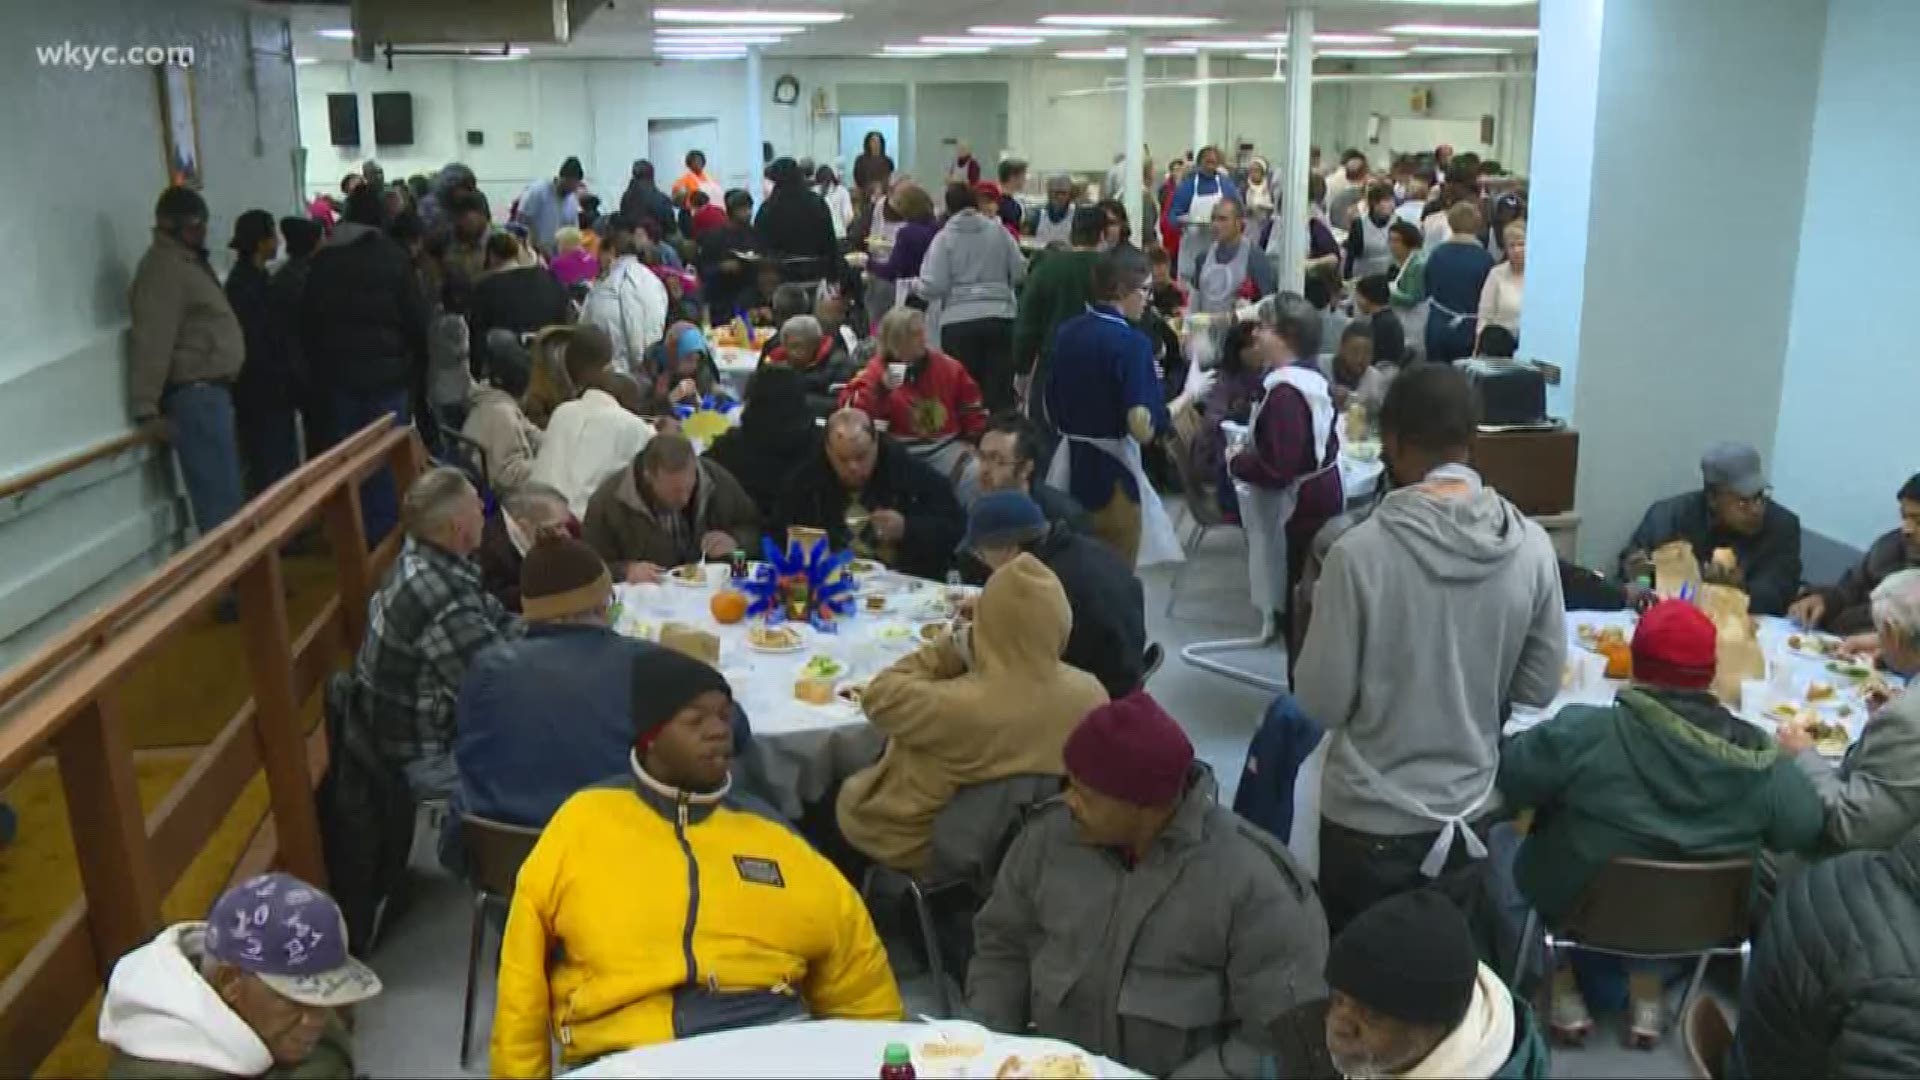 Areas largest hunger center pleads for volunteers